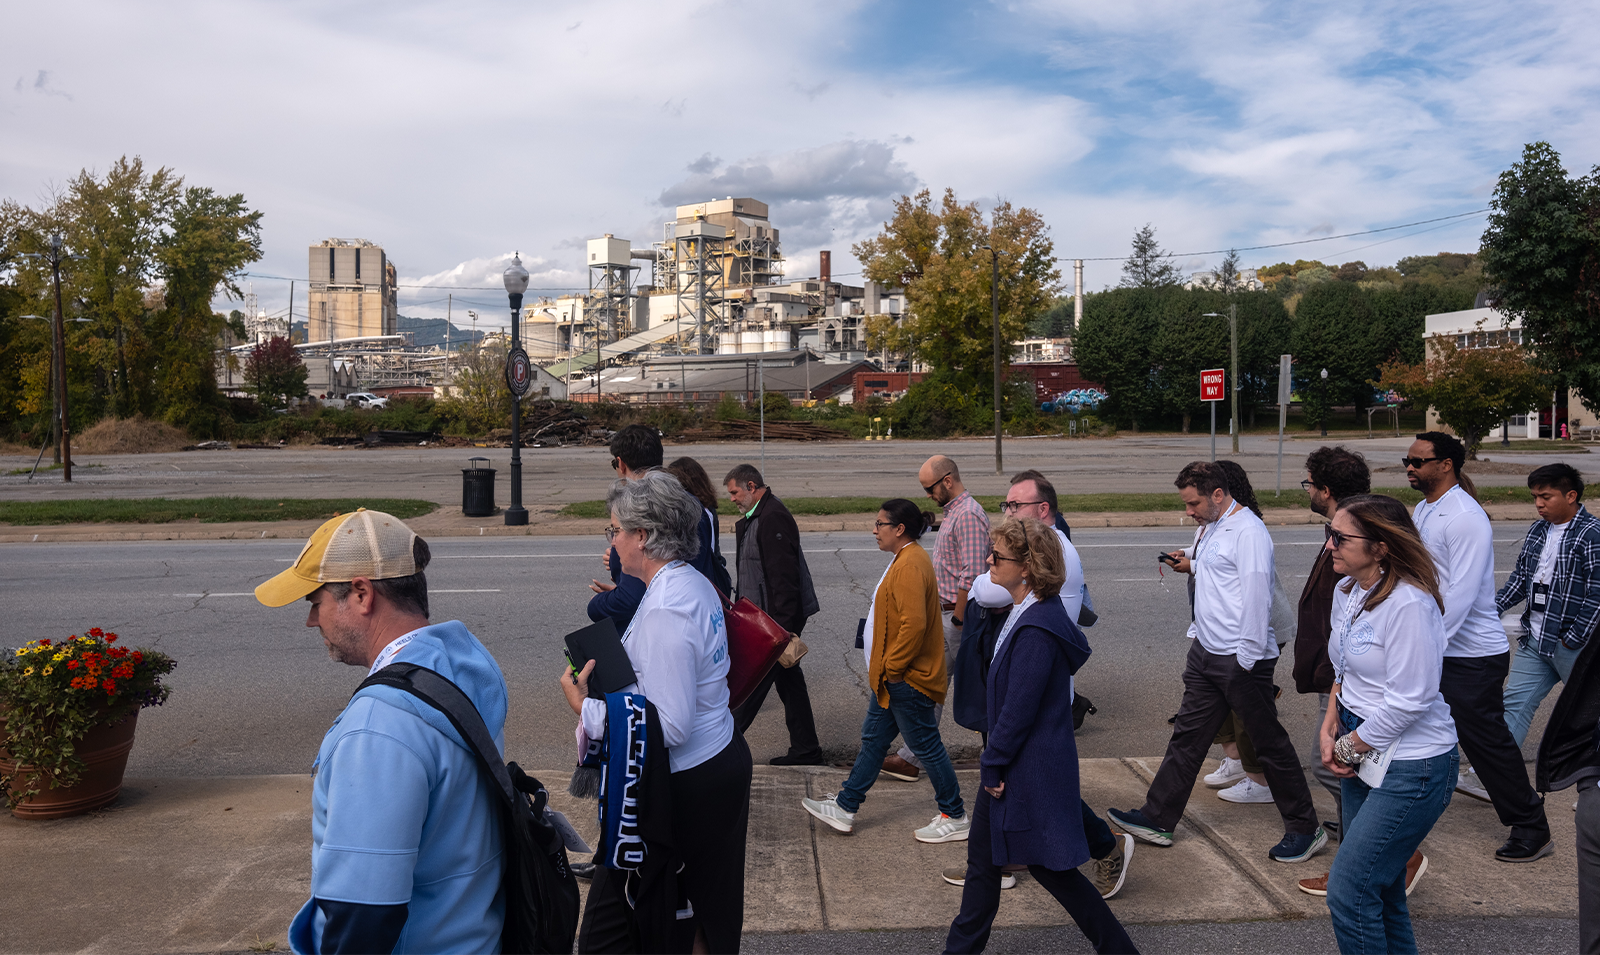 A group of Tar Heel Bus Tour participants walking down a sidwalk in downtown Canton with a recently closed down paper mill visible in the background.